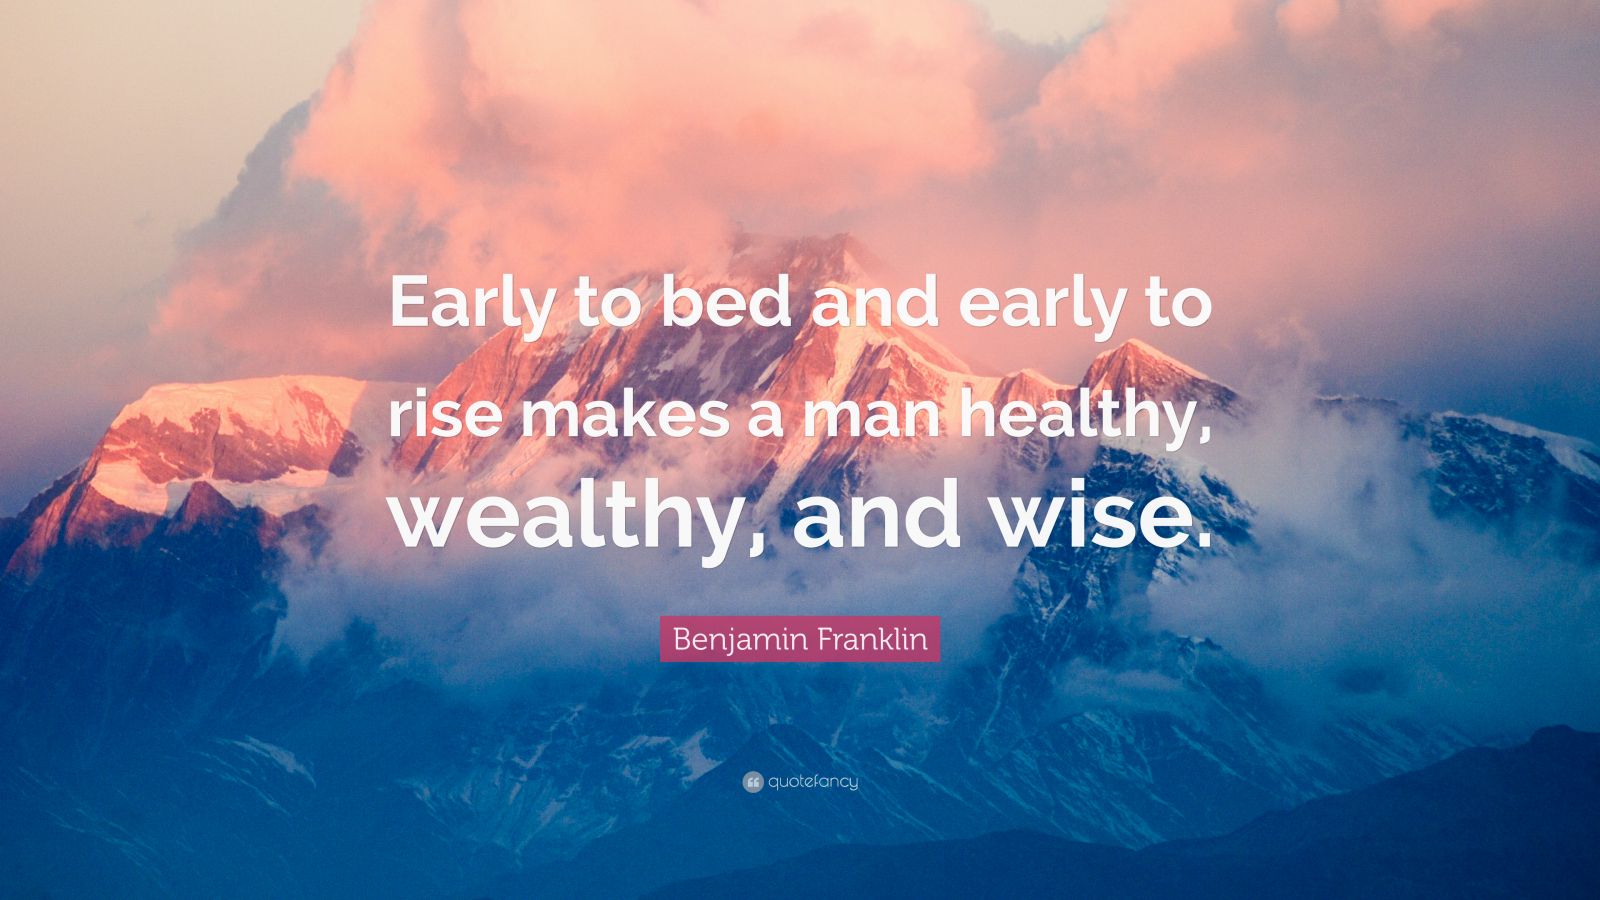 Benjamin Franklin Quote: "Early to bed and early to rise ...